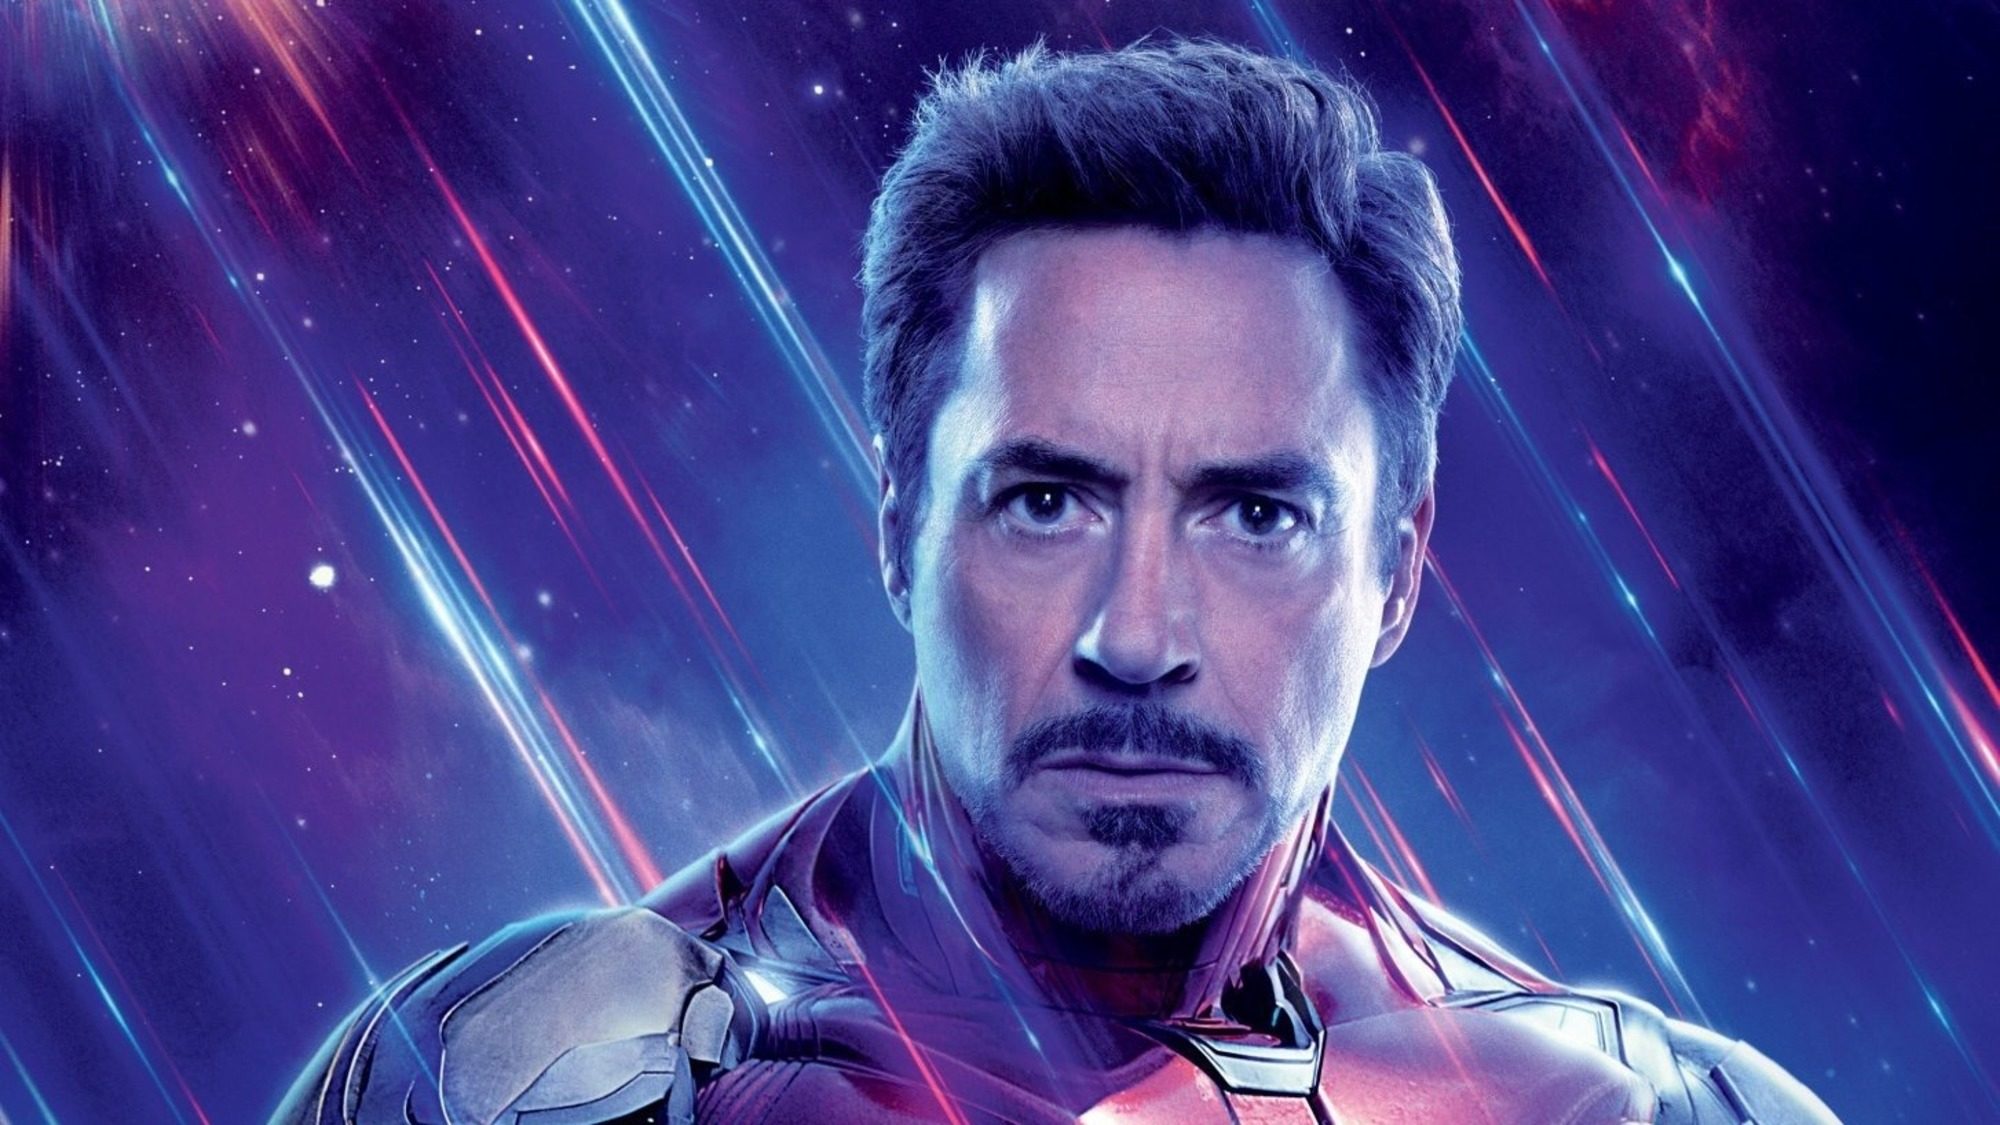 Avengers: Endgame' directors ask fans not to ruin the movie's